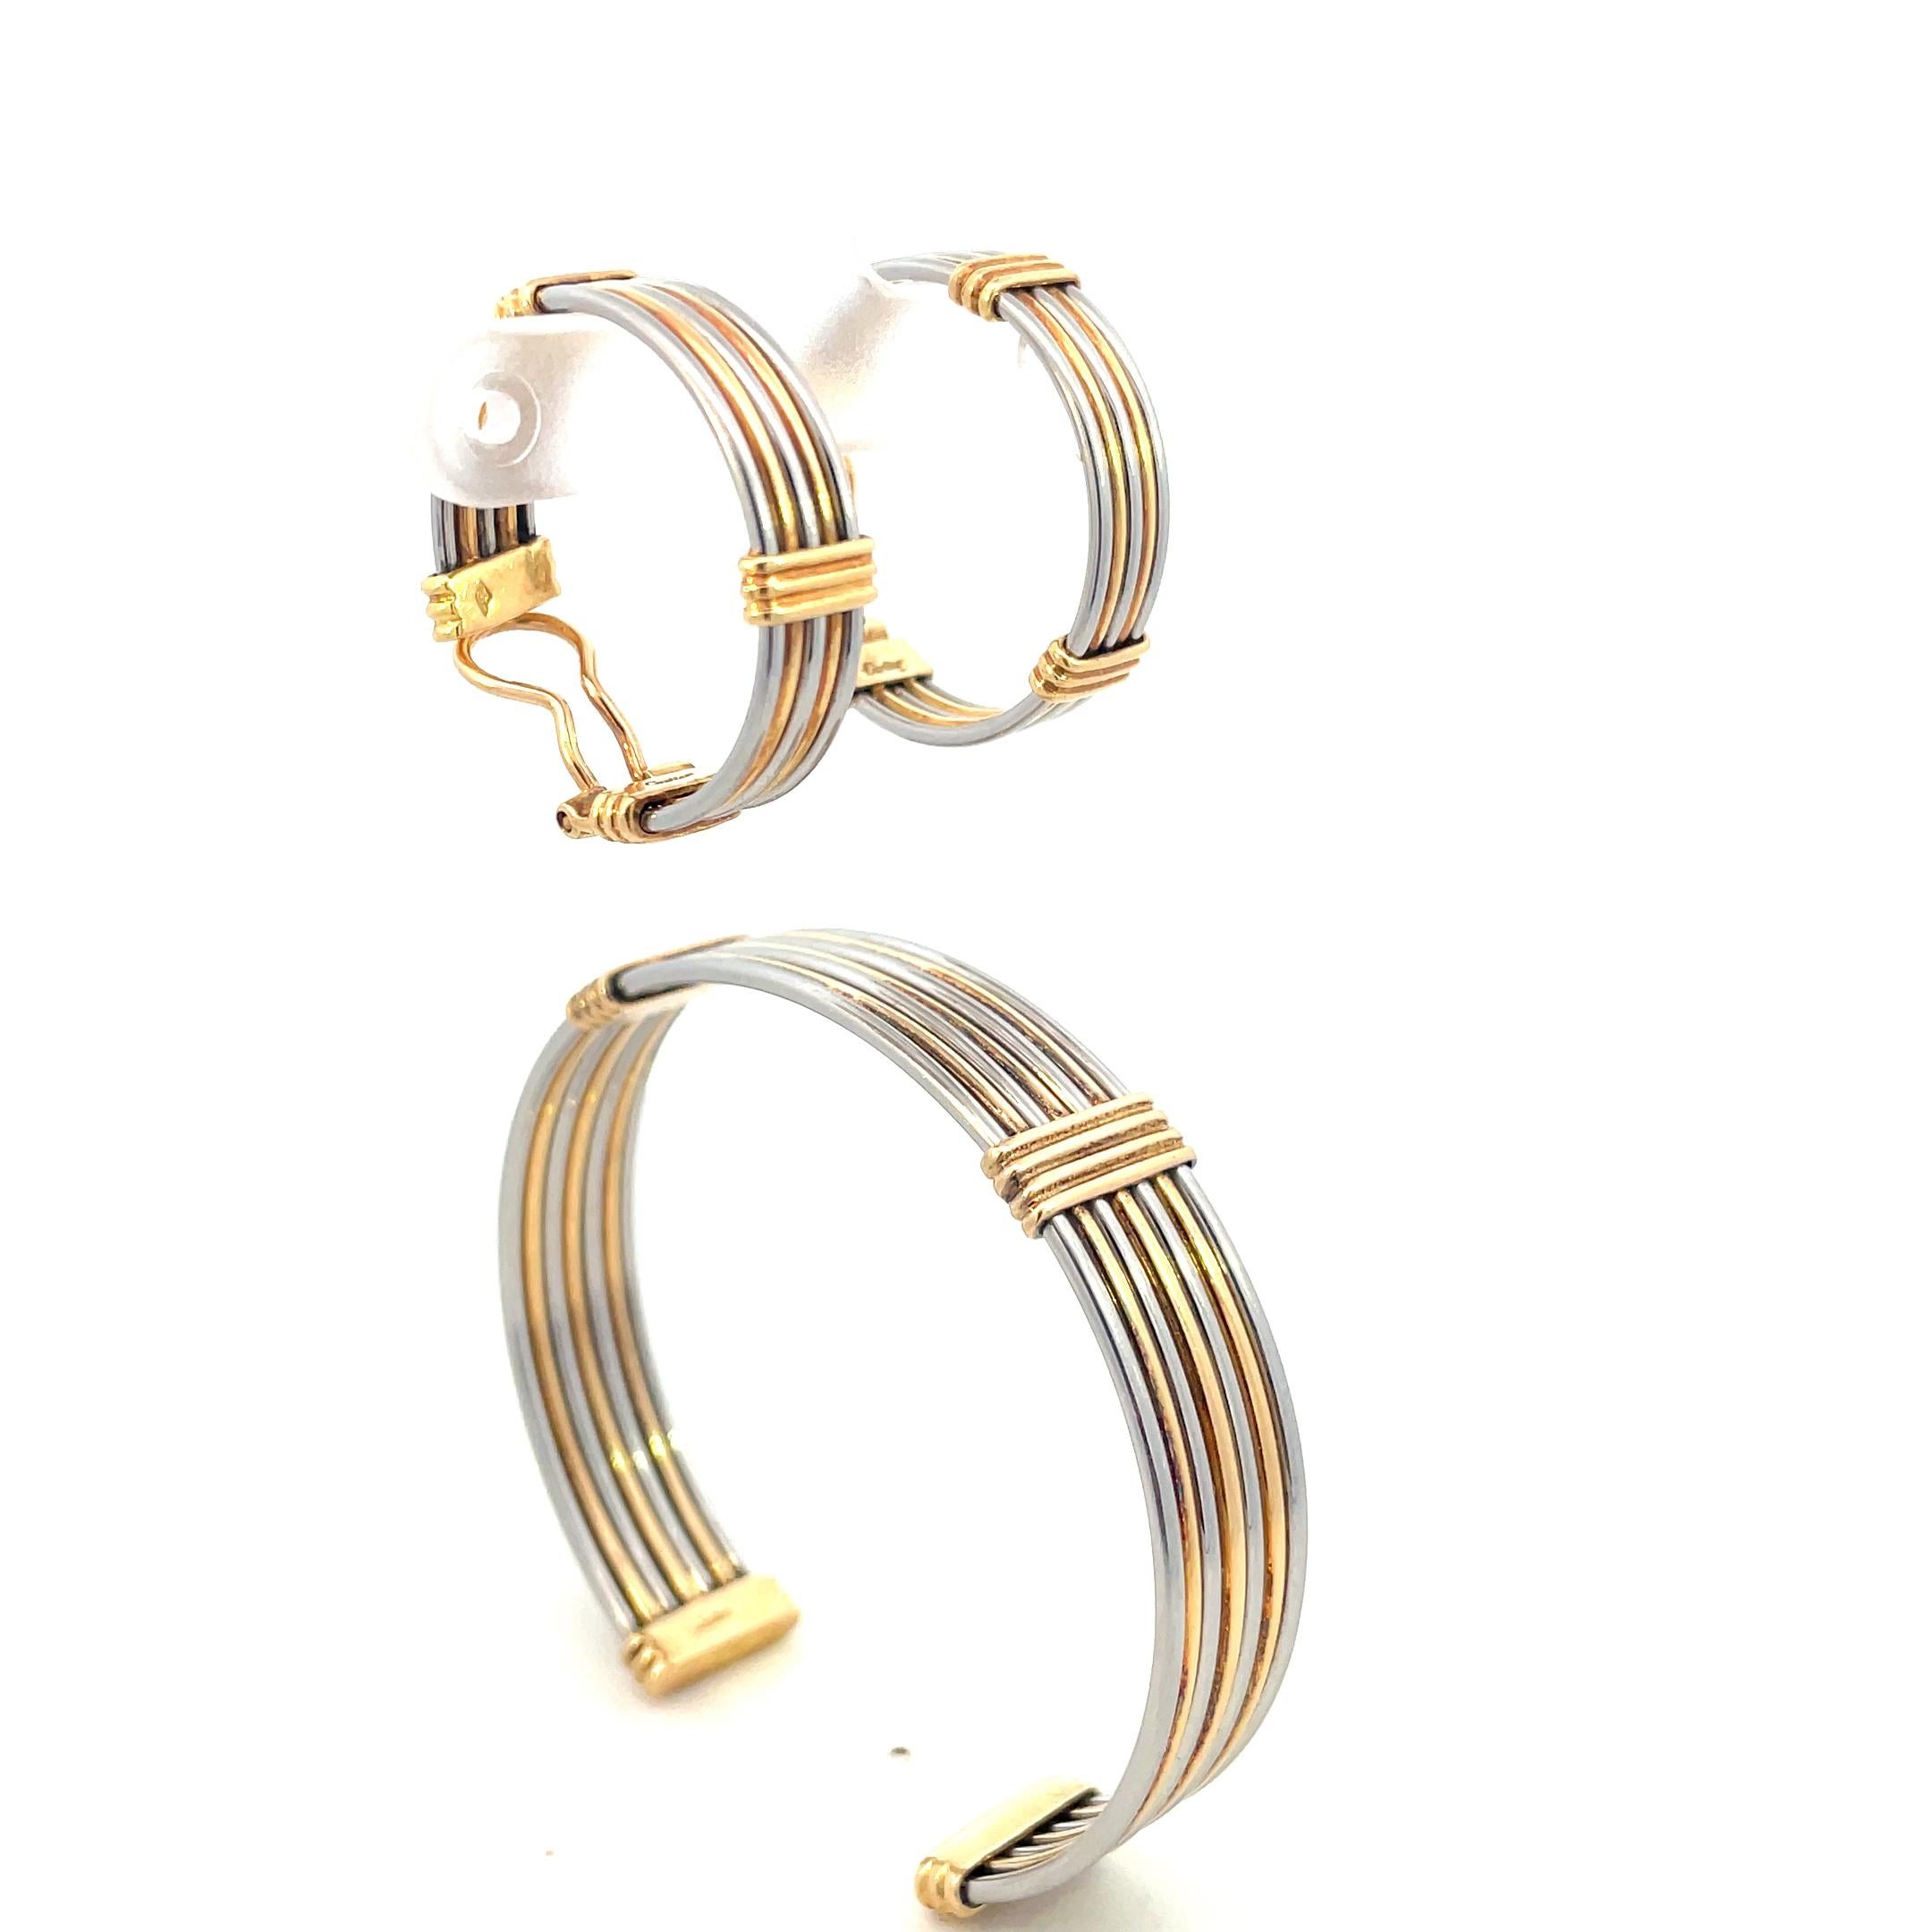 Cartier Vintage 18kt Gold Stainless Steel Bangle Bracelet and Earrings Set In Excellent Condition For Sale In Milano, IT